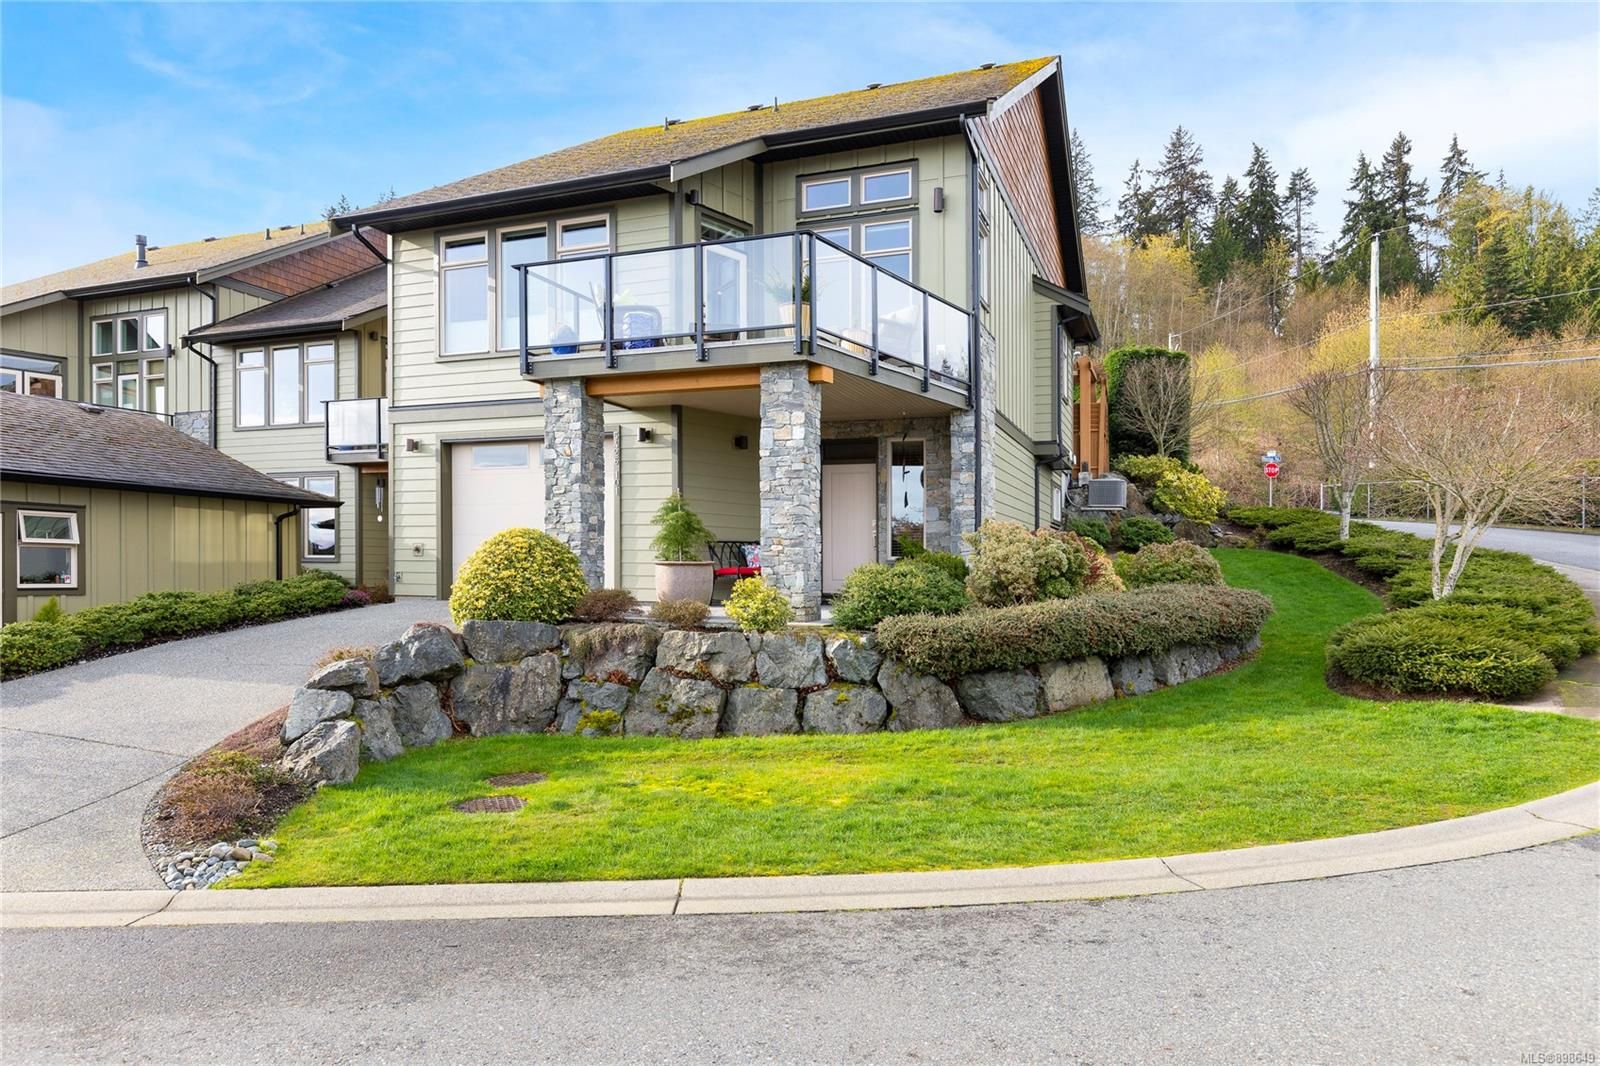 I have sold a property at 101 5426 Jacobs Lane in Nanaimo
